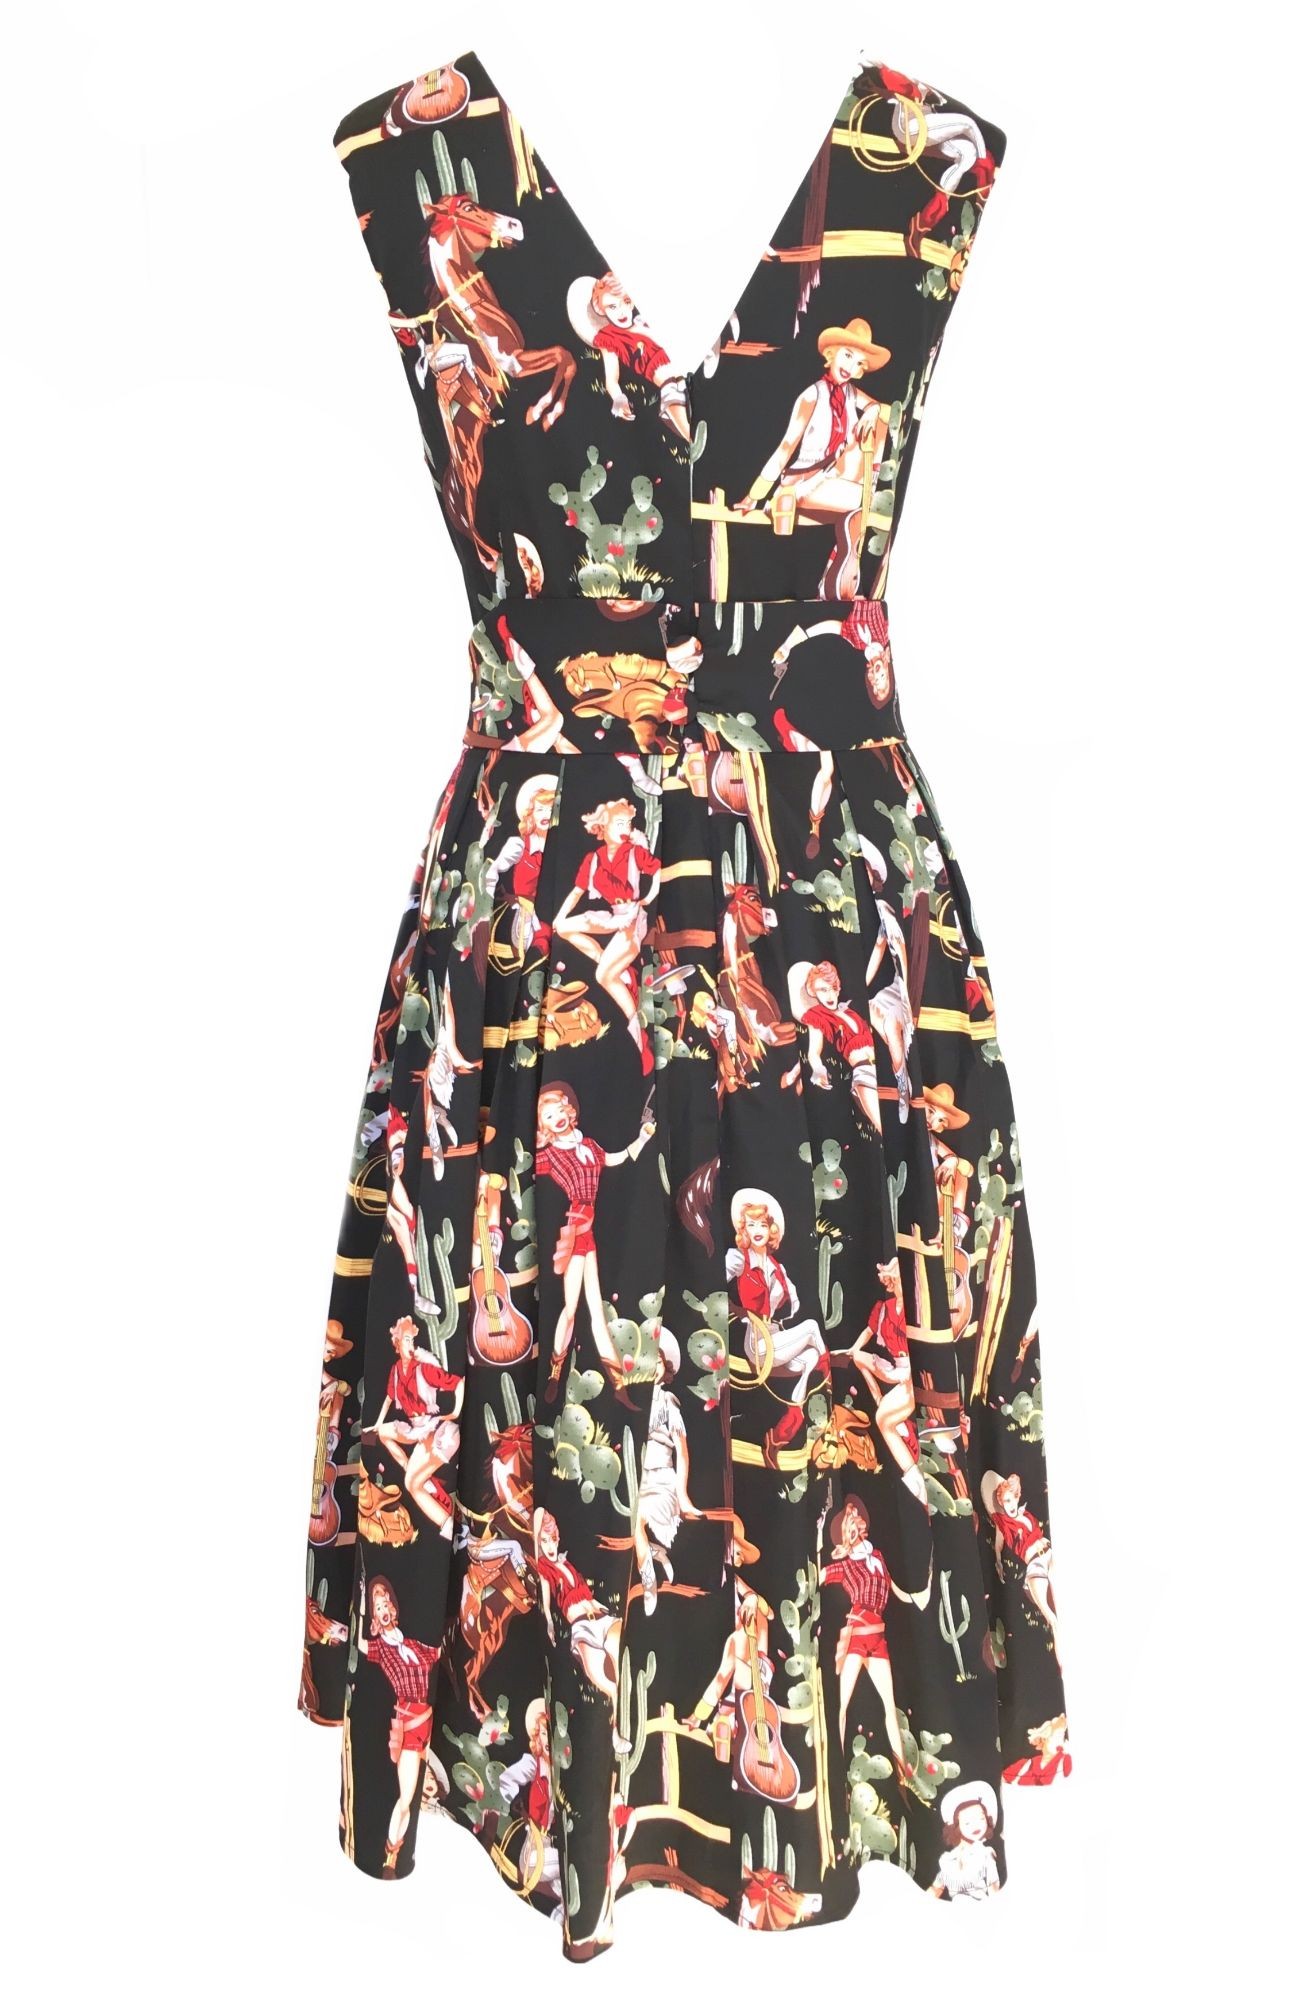 Cowgirl Print Dress - Quirky Printed Prom